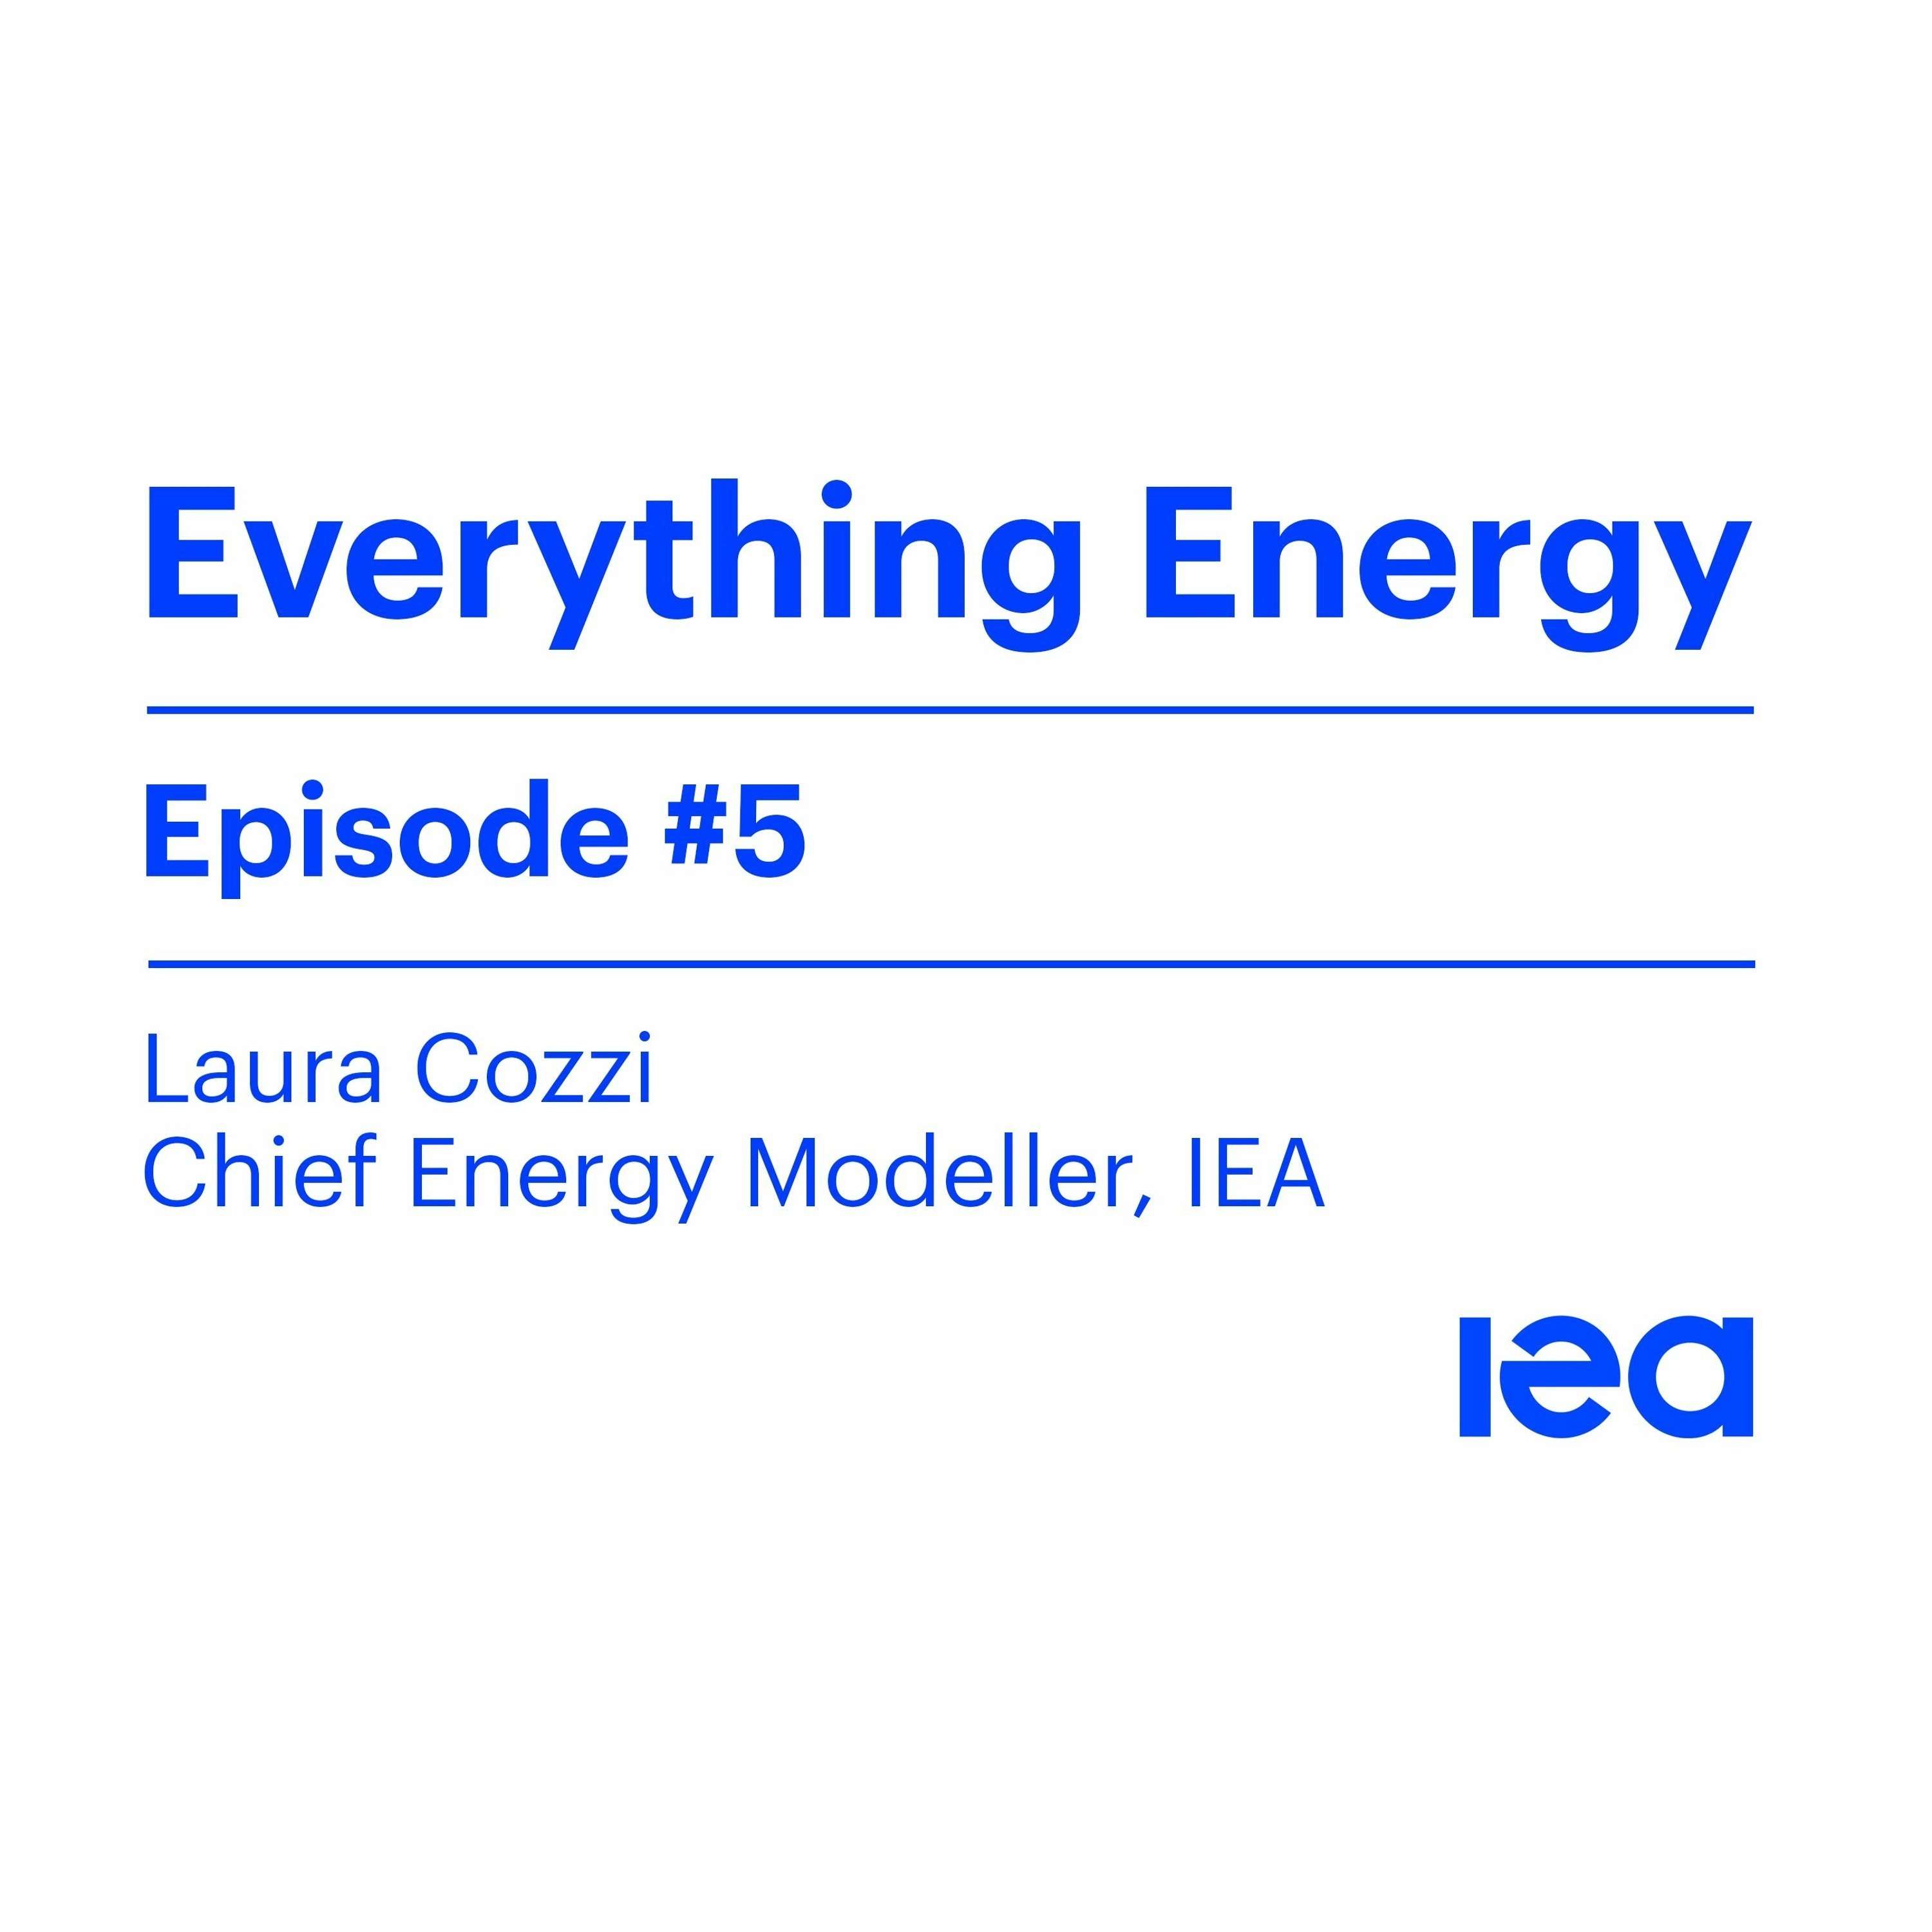 Episode 5: The Sustainable Recovery Plan - a roadmap for the energy sector